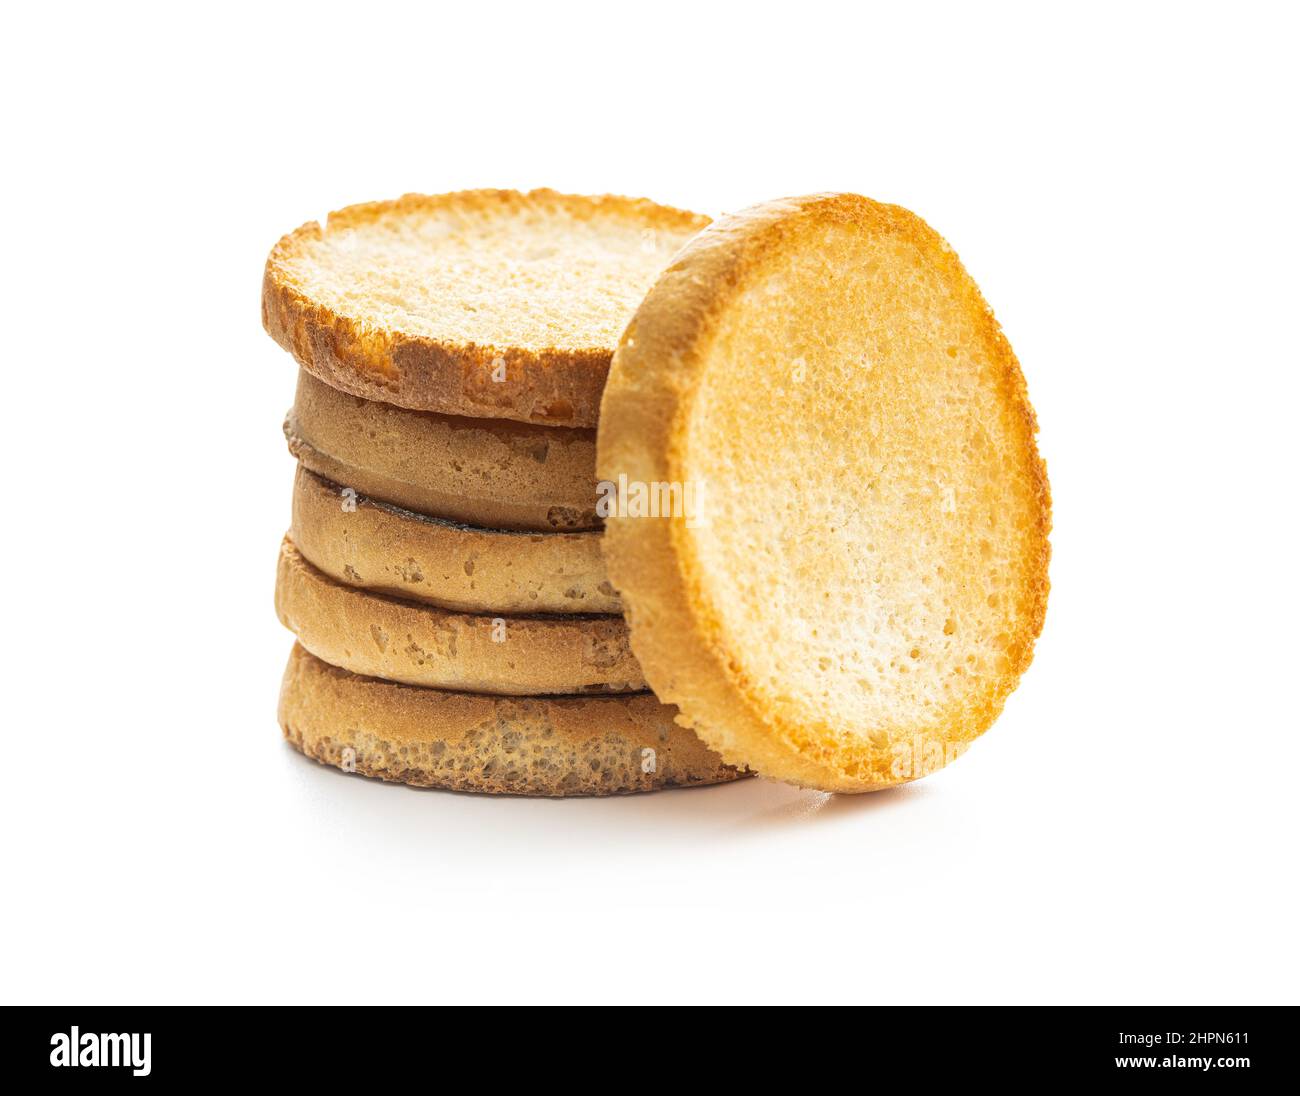 Dietary rusks bread. Crusty biscuits isolated on a white background. Stock Photo